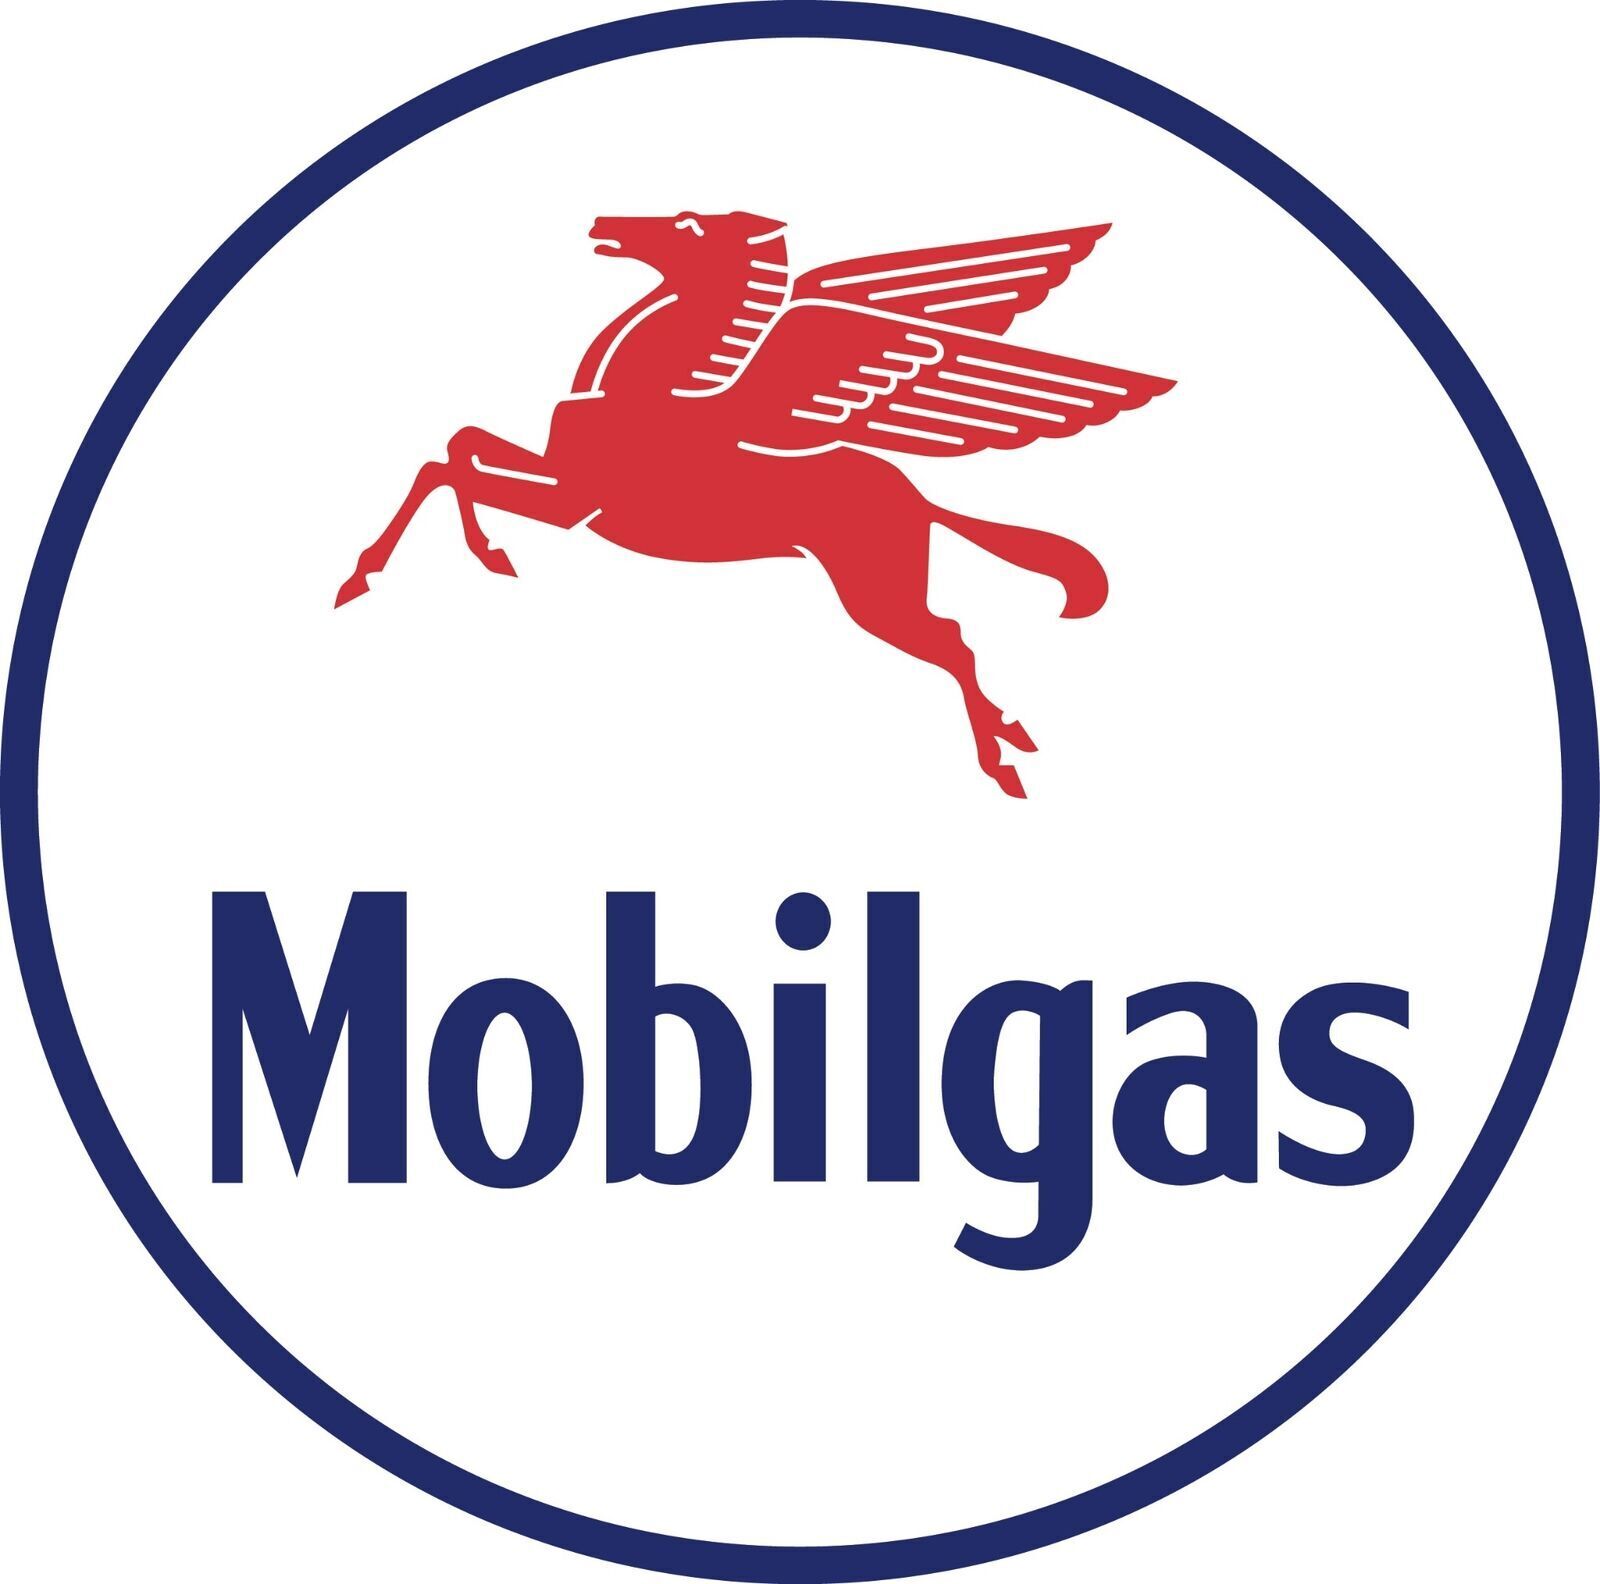 Mobil Gas Circle  sticker Vinyl Decal |10 Sizes with TRACKING